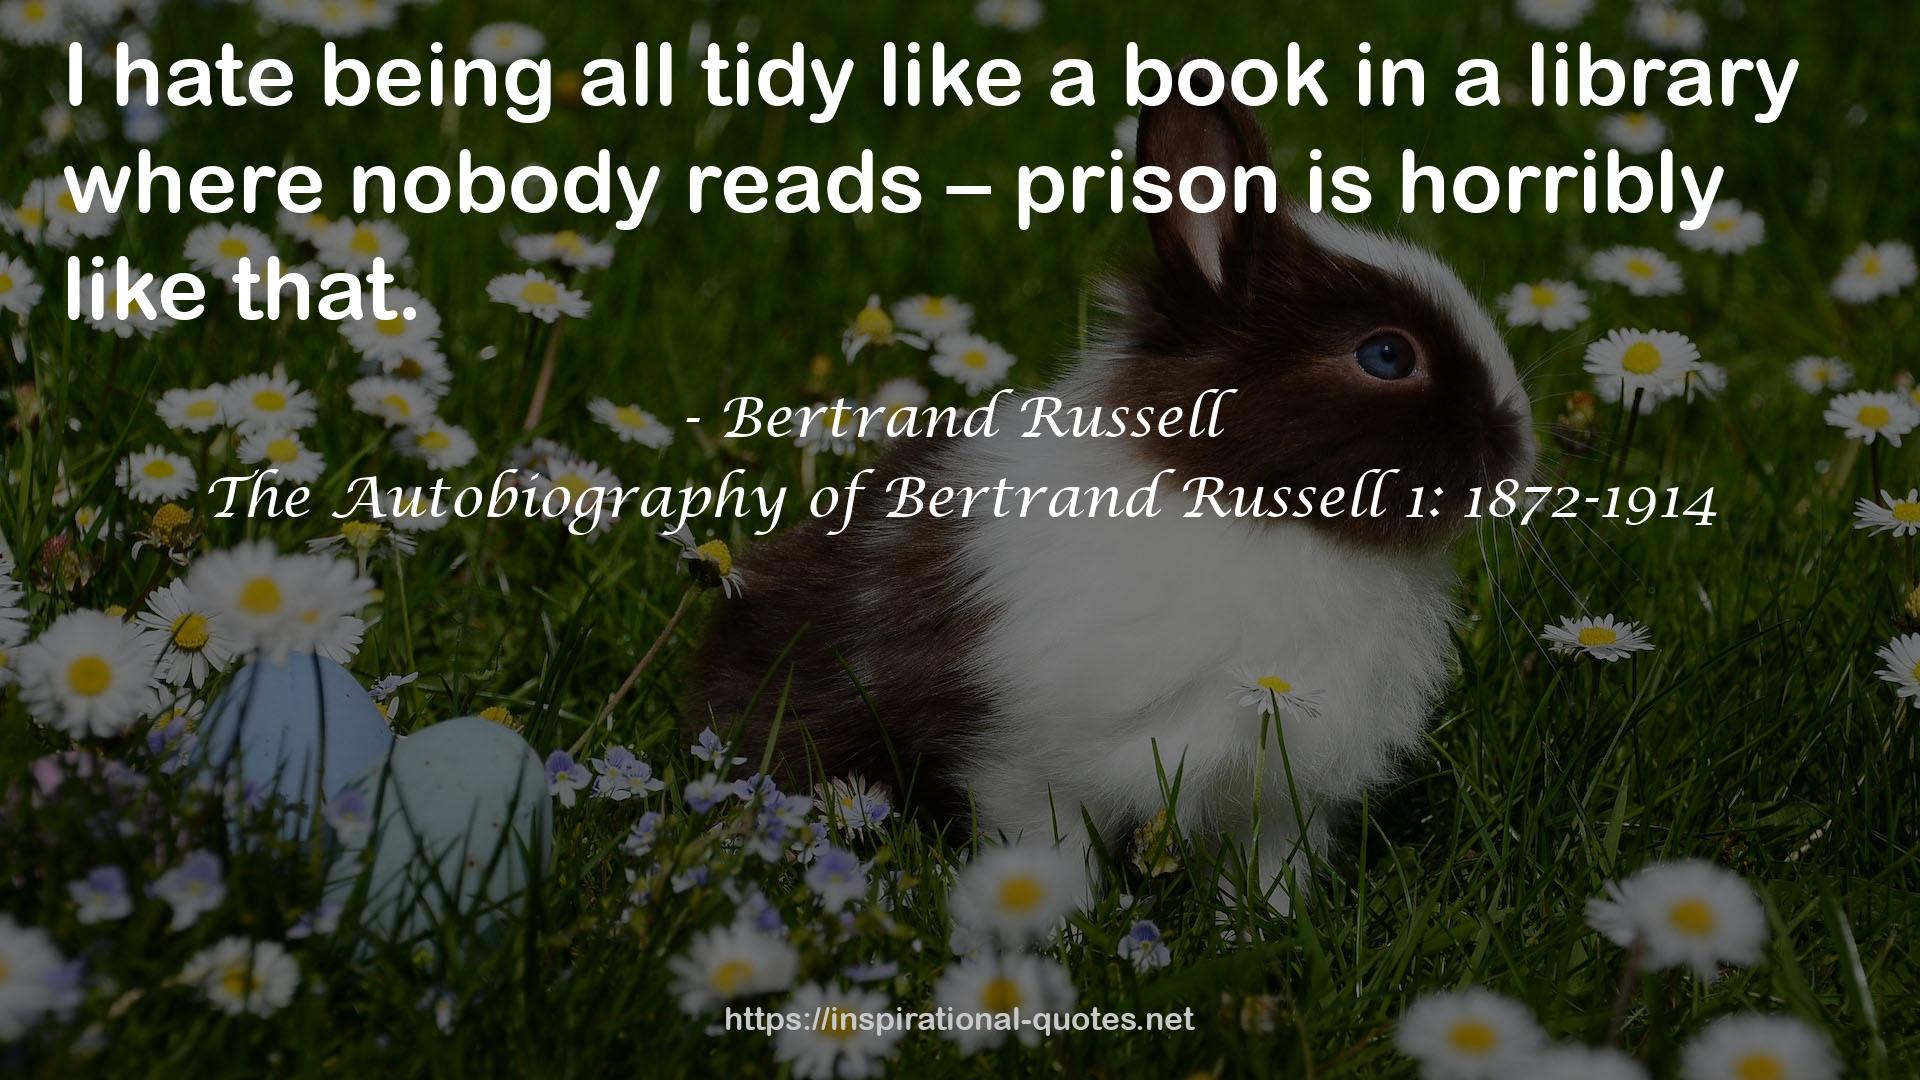 The Autobiography of Bertrand Russell 1: 1872-1914 QUOTES